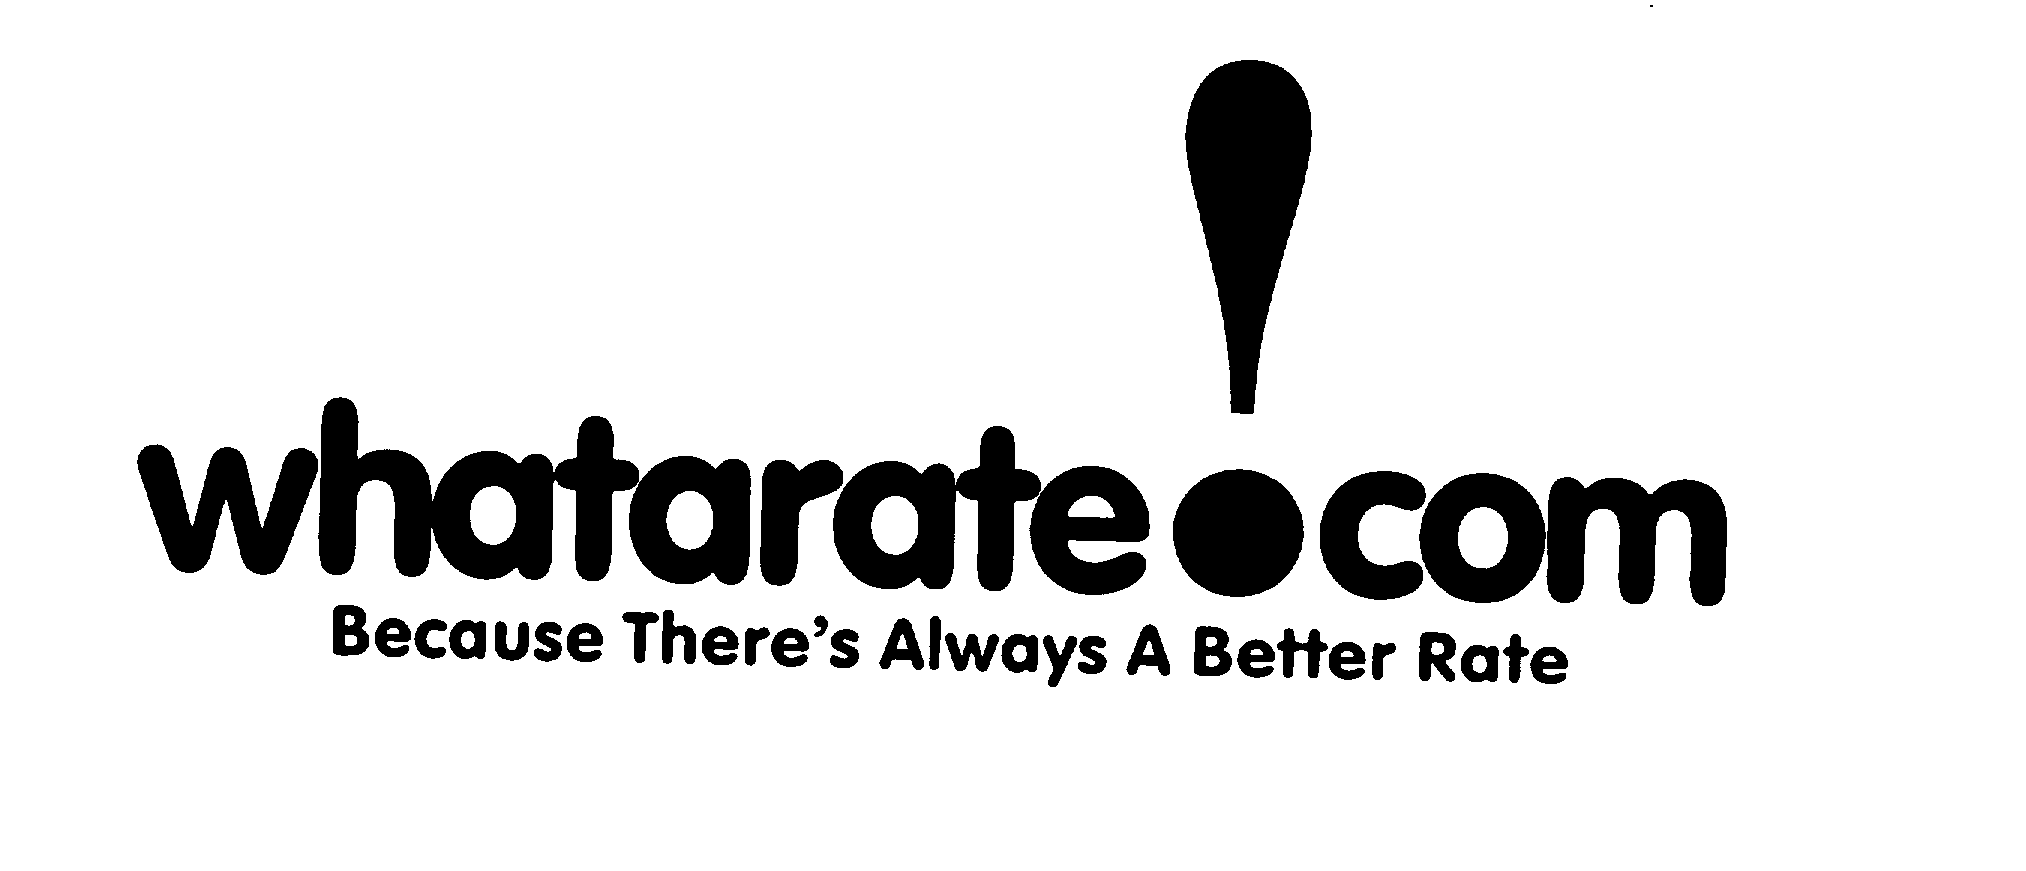  WHATARATE! COM BECAUSE THERE'S ALWAYS A BETTER RATE